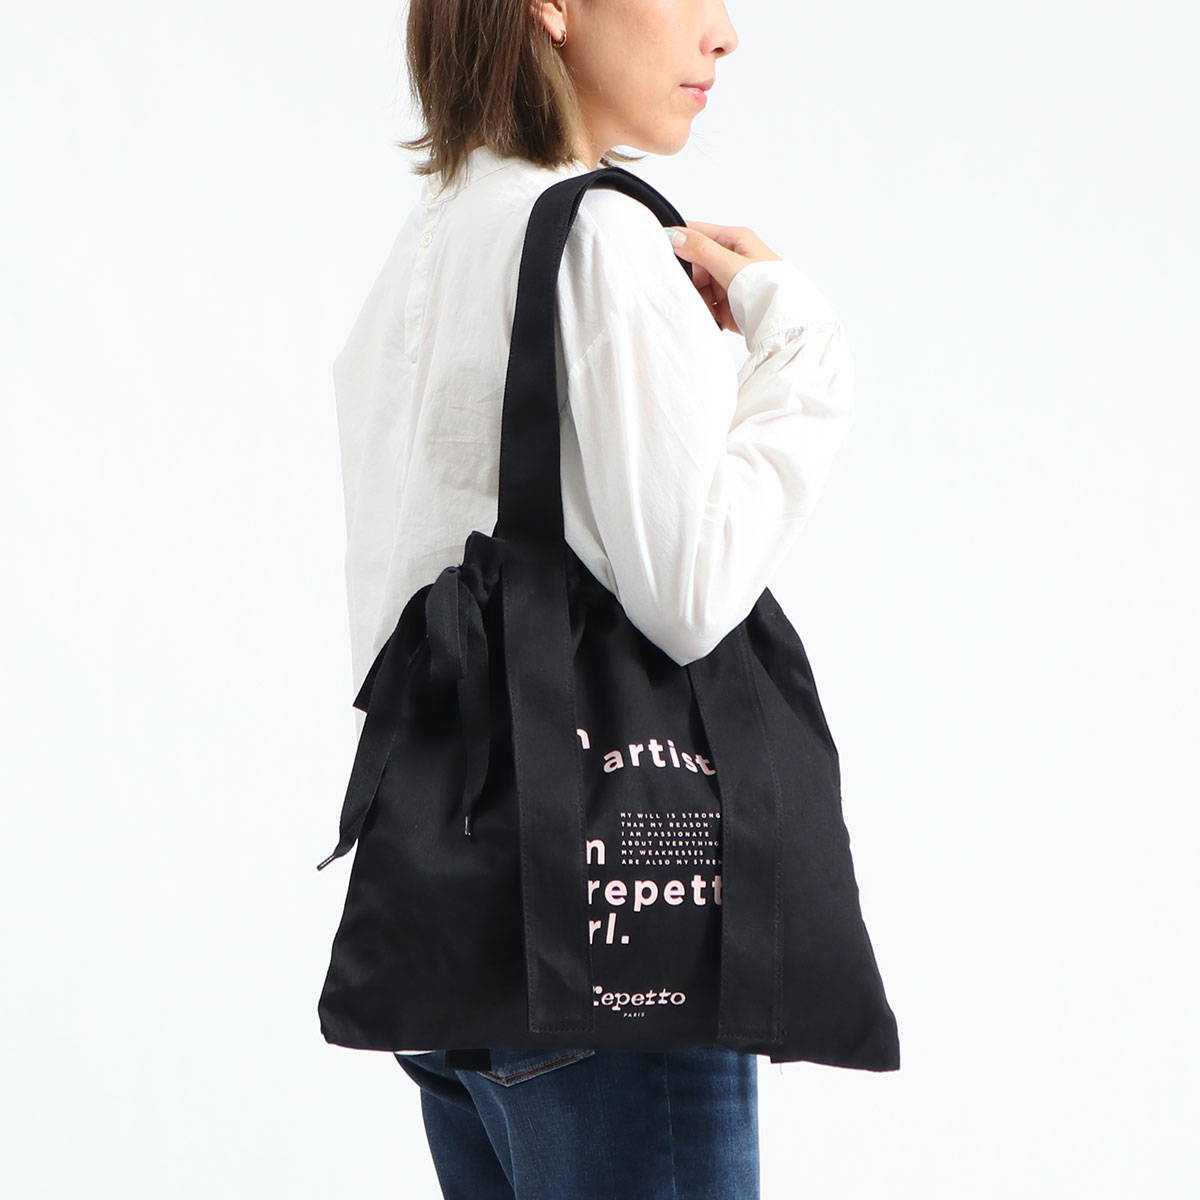 Repetto レペット Rondo tote bag with knots トートバッグ 51204-5 